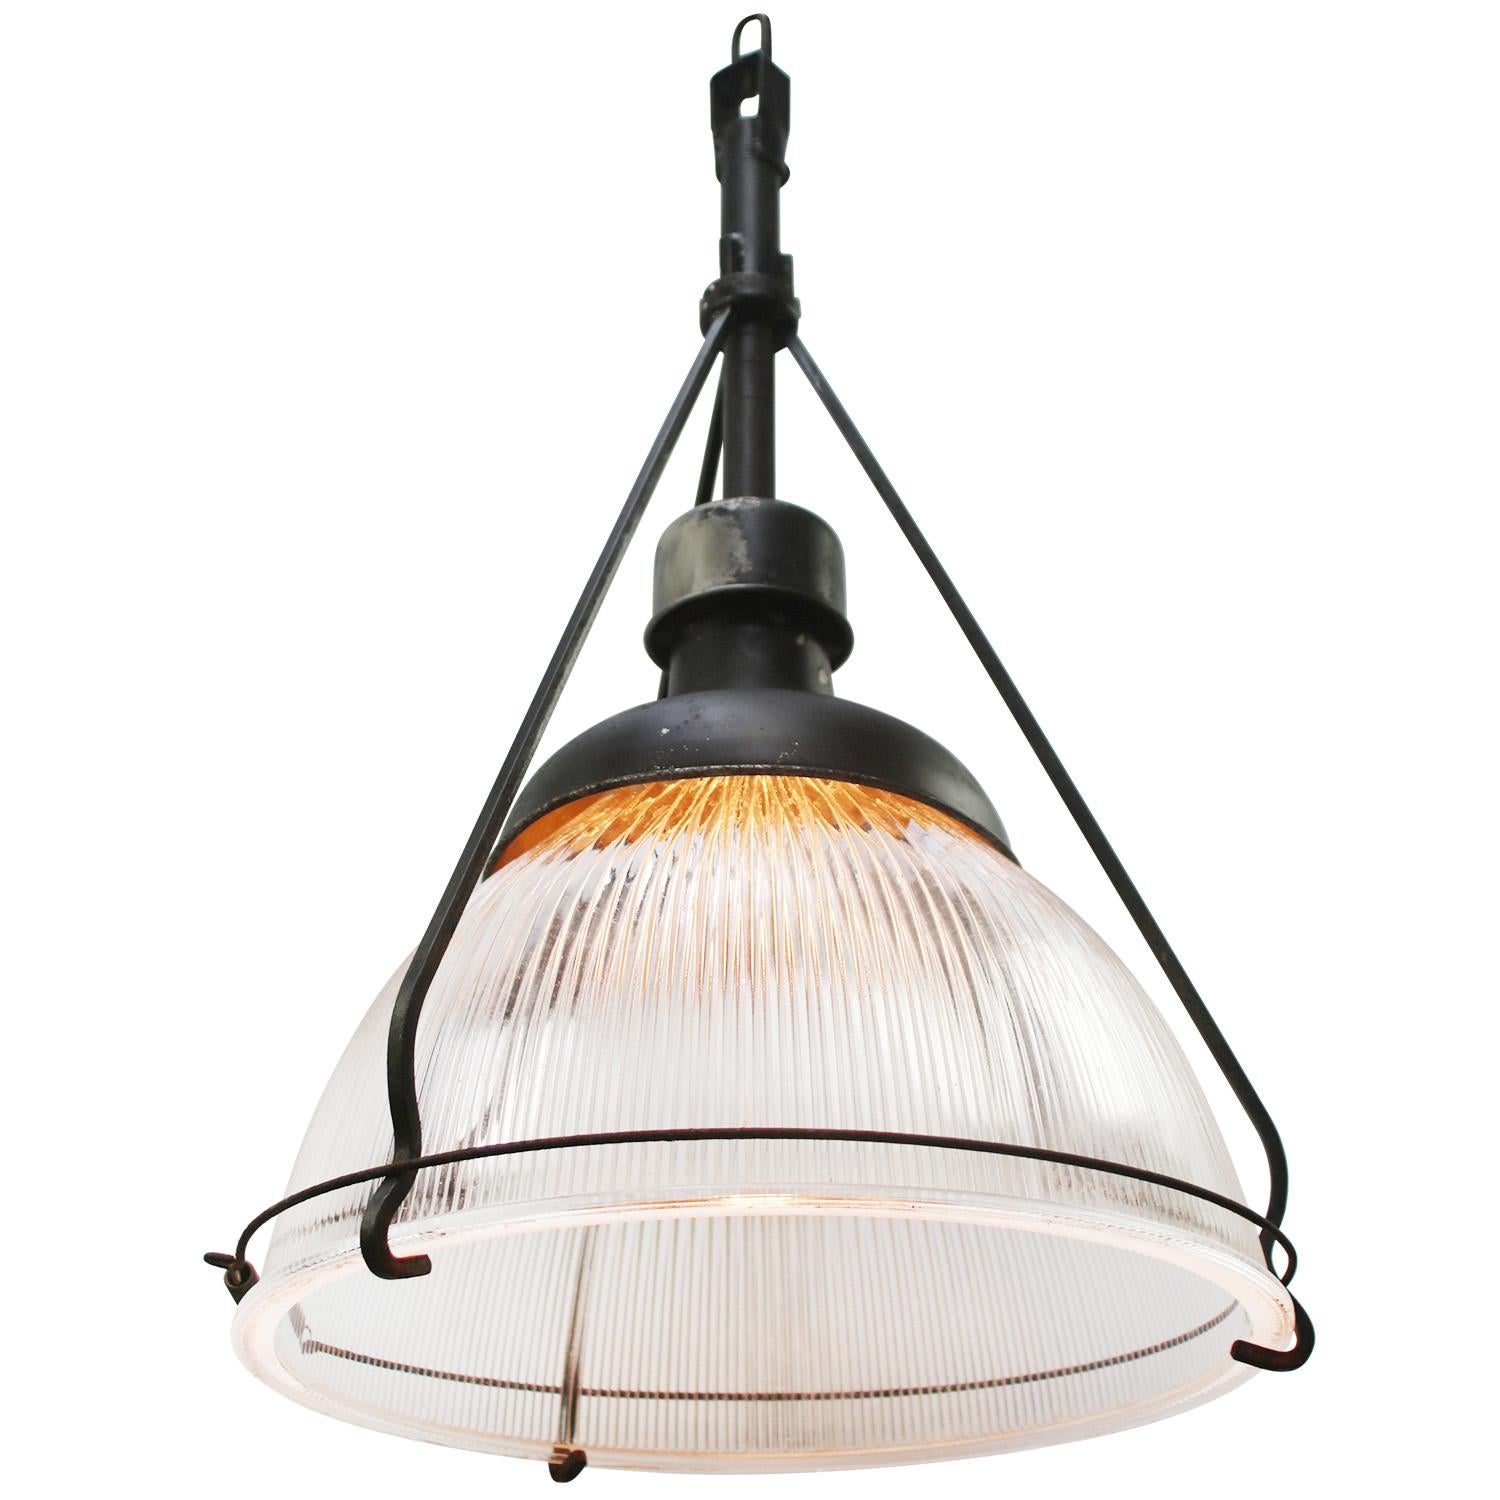 Glass lamp by Holophane, USA.
Iron top. Porcelain bulb holder.
2 meter black wire.

Weight: 8.50 kg / 18.7 lb

Priced per individual item. All lamps have been made suitable by international standards for incandescent light bulbs, energy-efficient